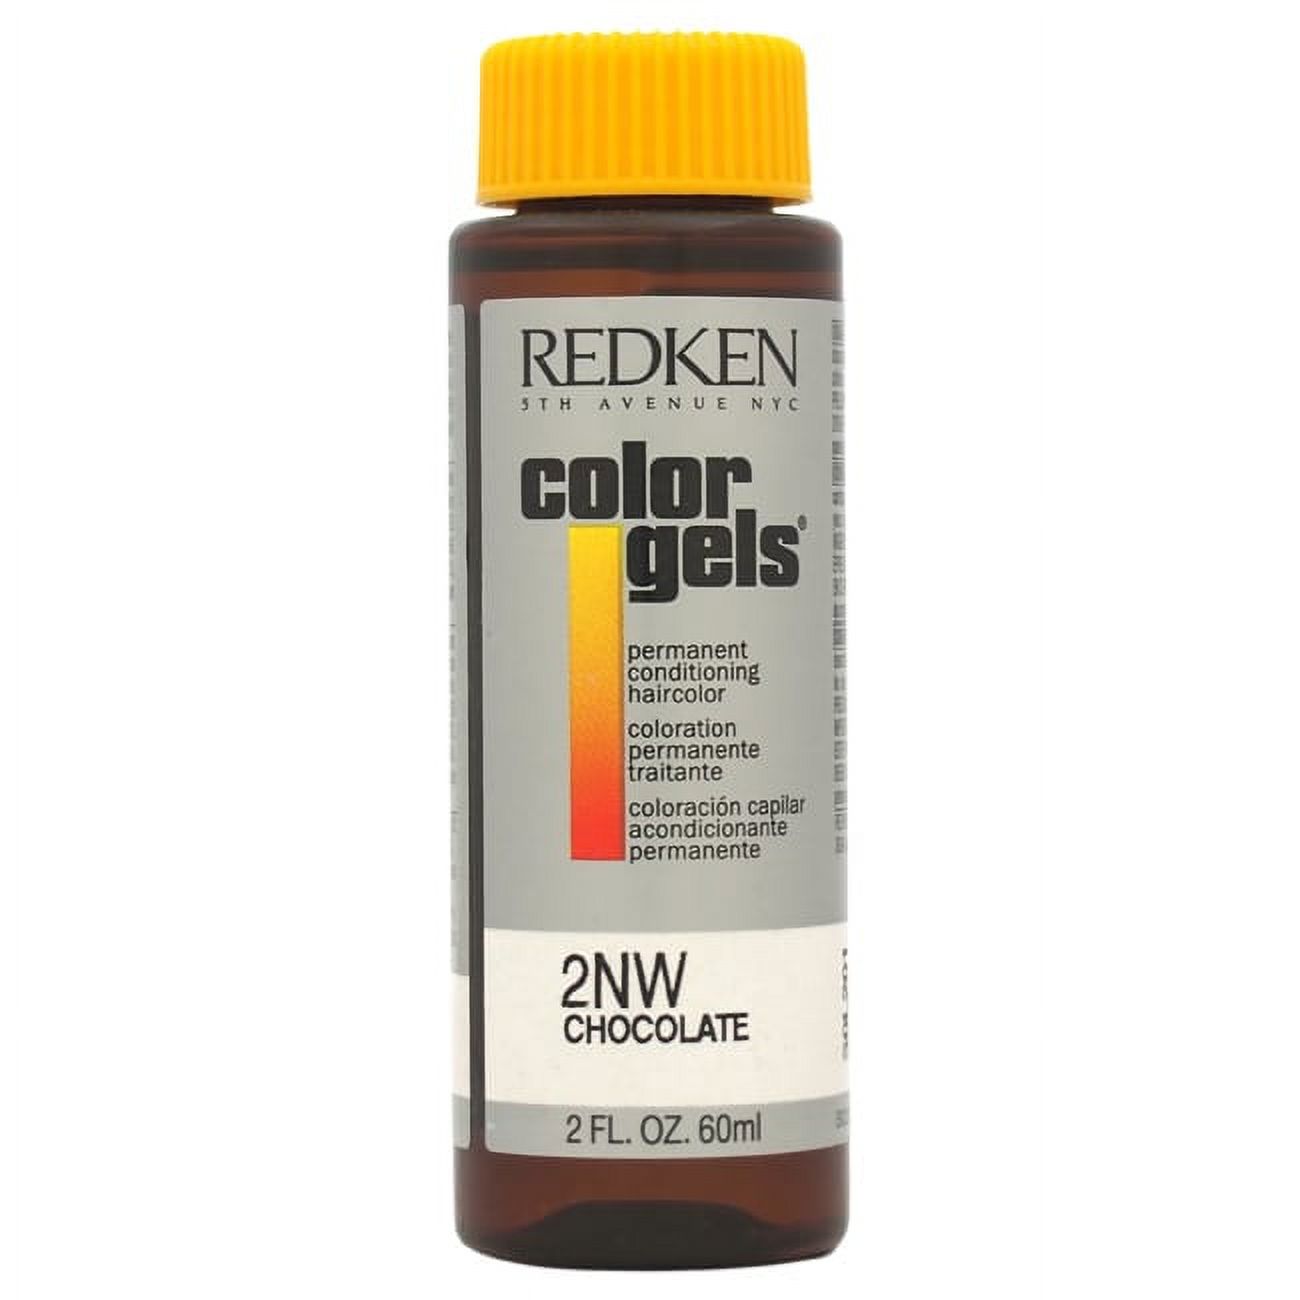 Redken Color Gels Permanent Conditioning Haircolor 2Nw - Chocolate, 2 Oz - image 2 of 2